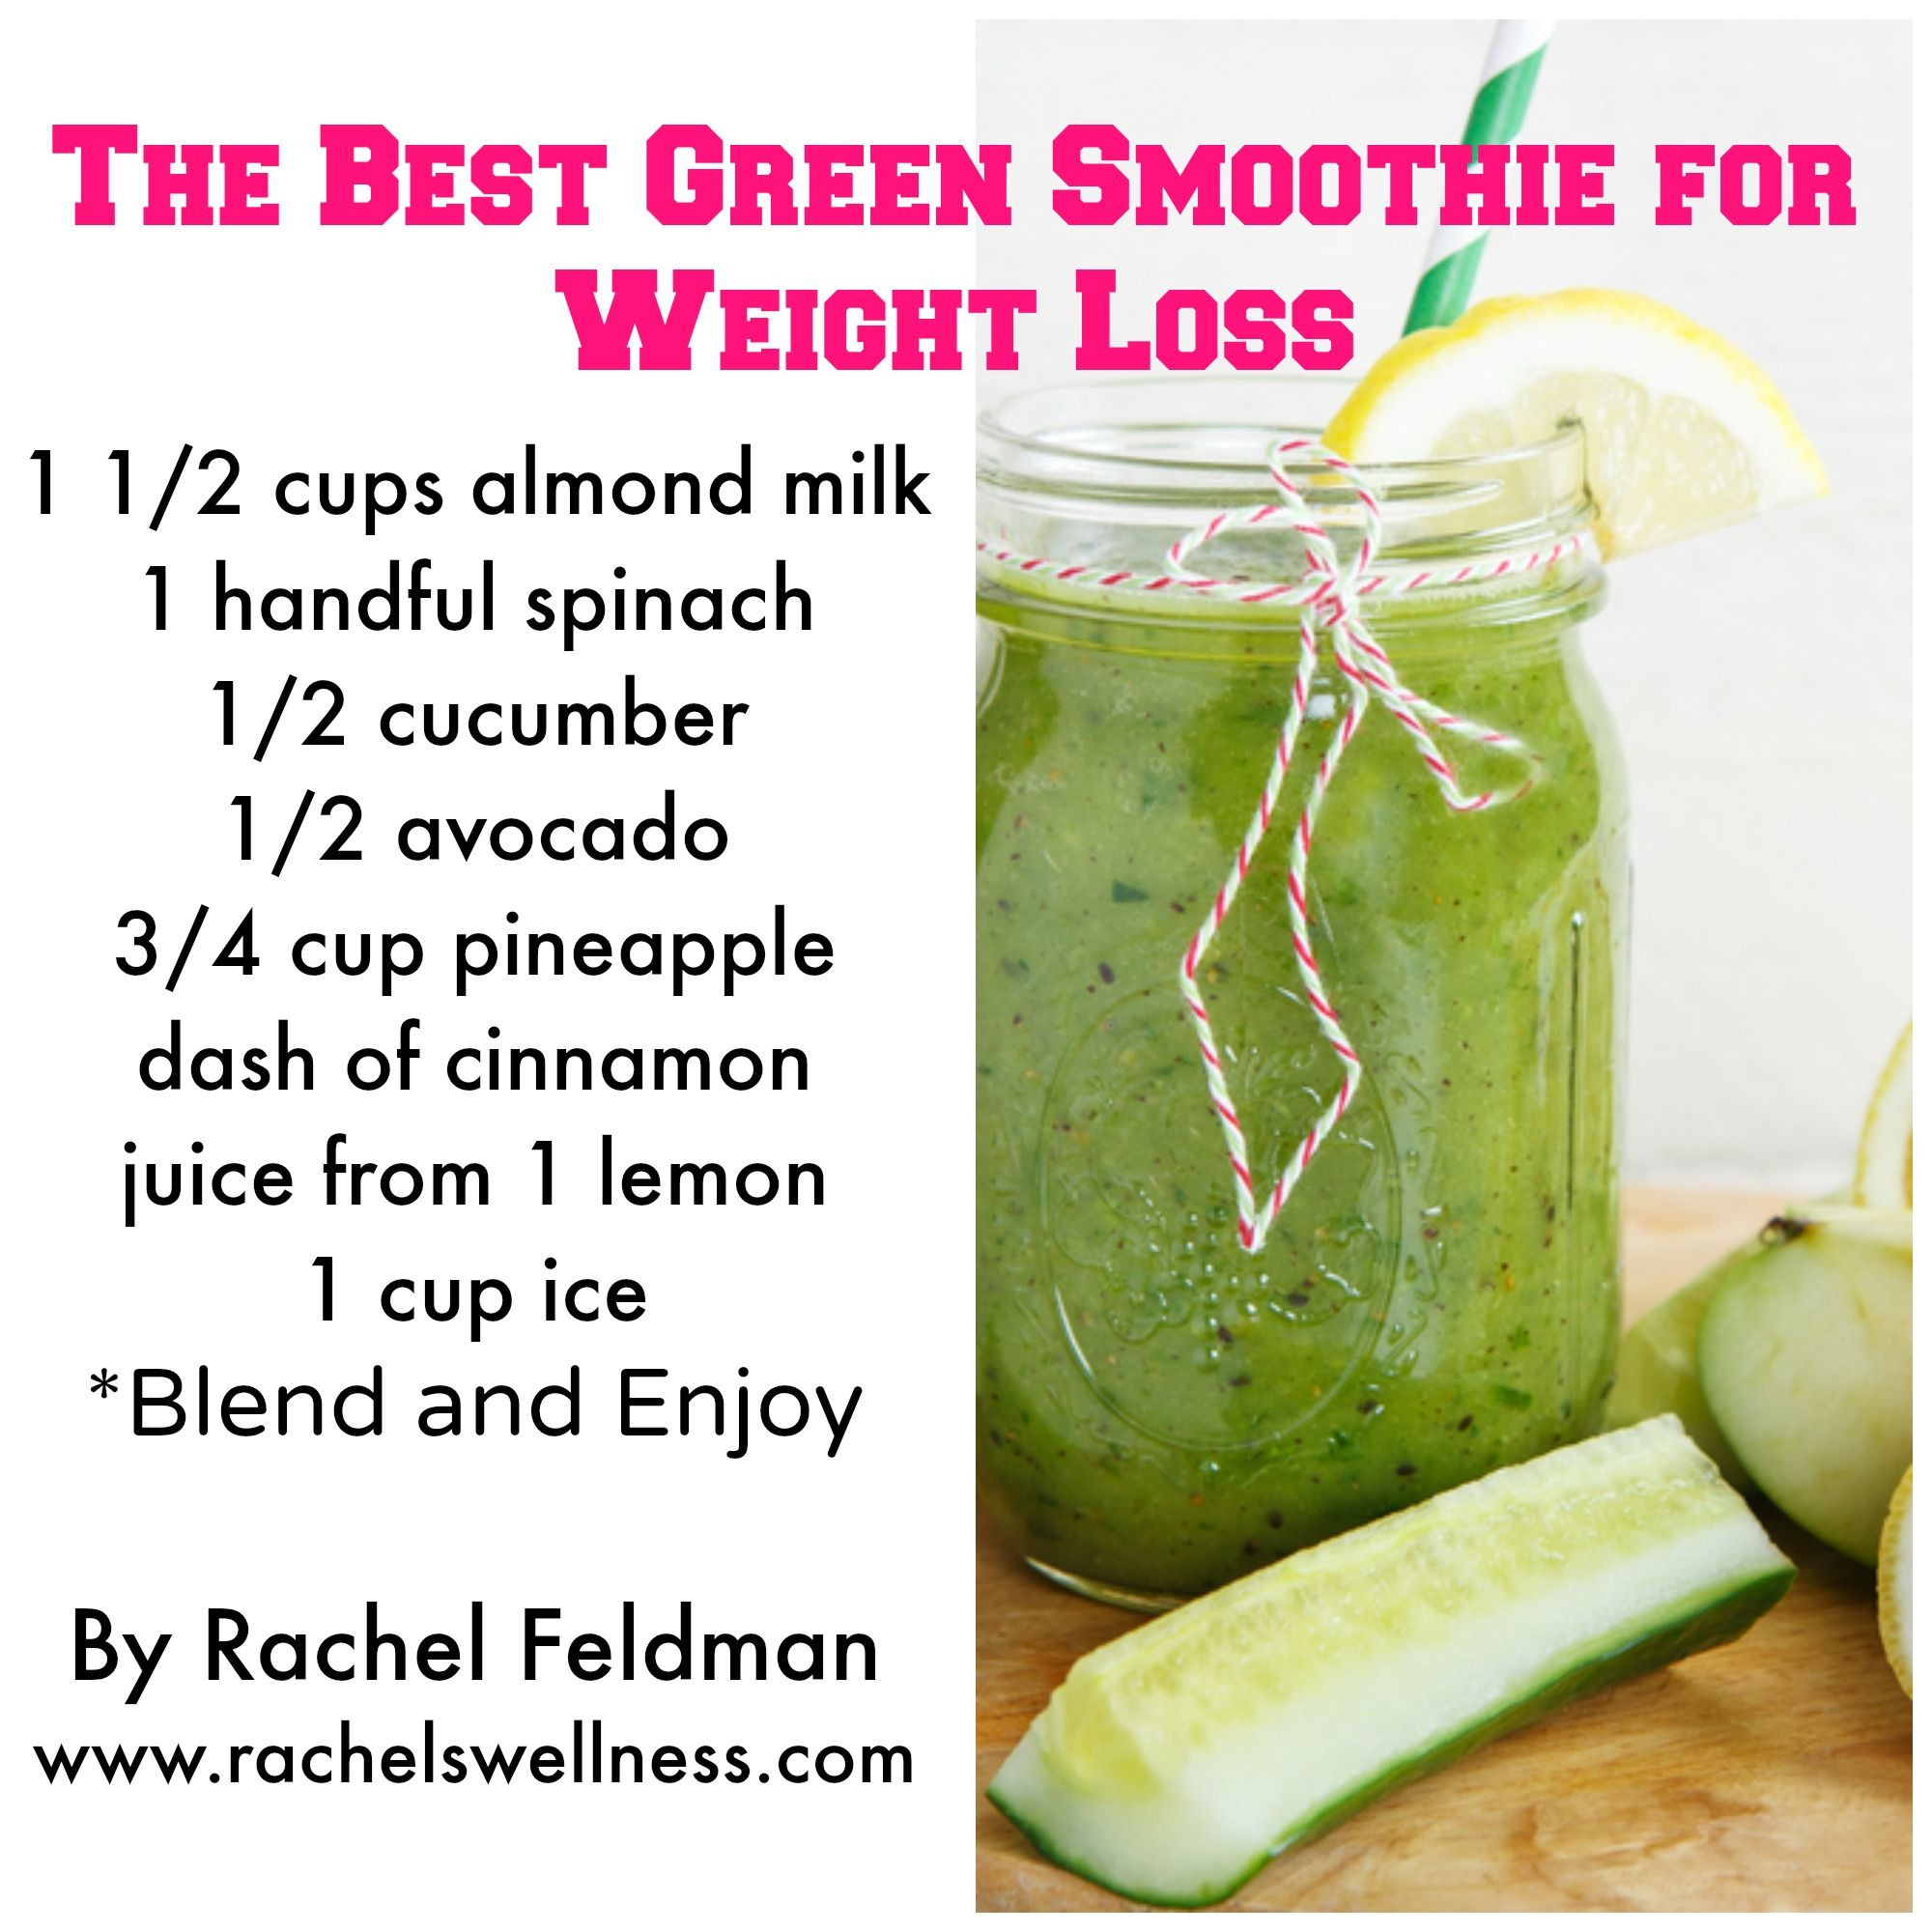 Healthy Green Smoothies For Weight Loss
 7 Healthy Green Smoothie Recipes For Weight Loss